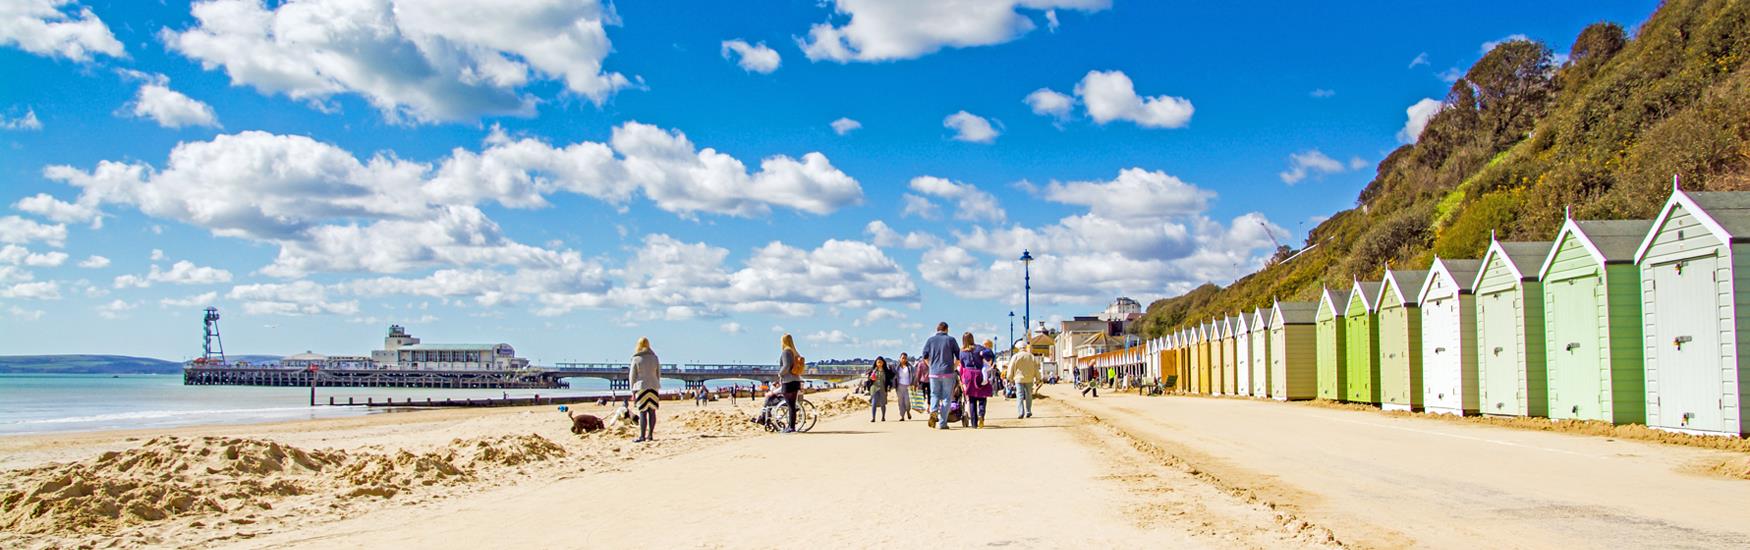 Bournemouth Travel Information - Trains, Buses, Car, Air, Ferry